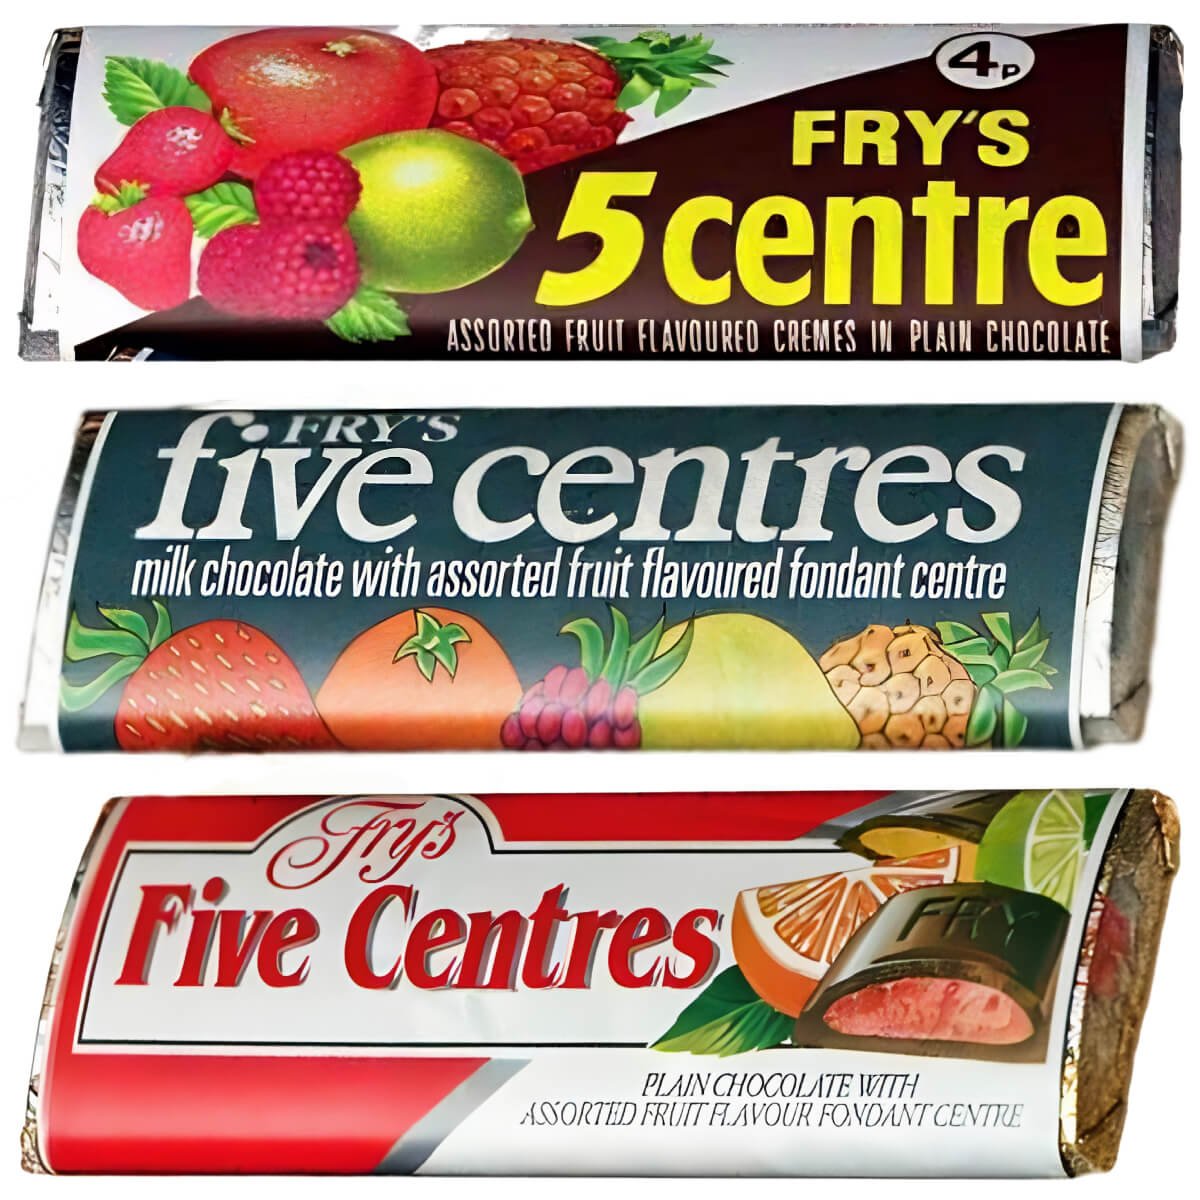 Whatever Happened to Fry's Five Centres?